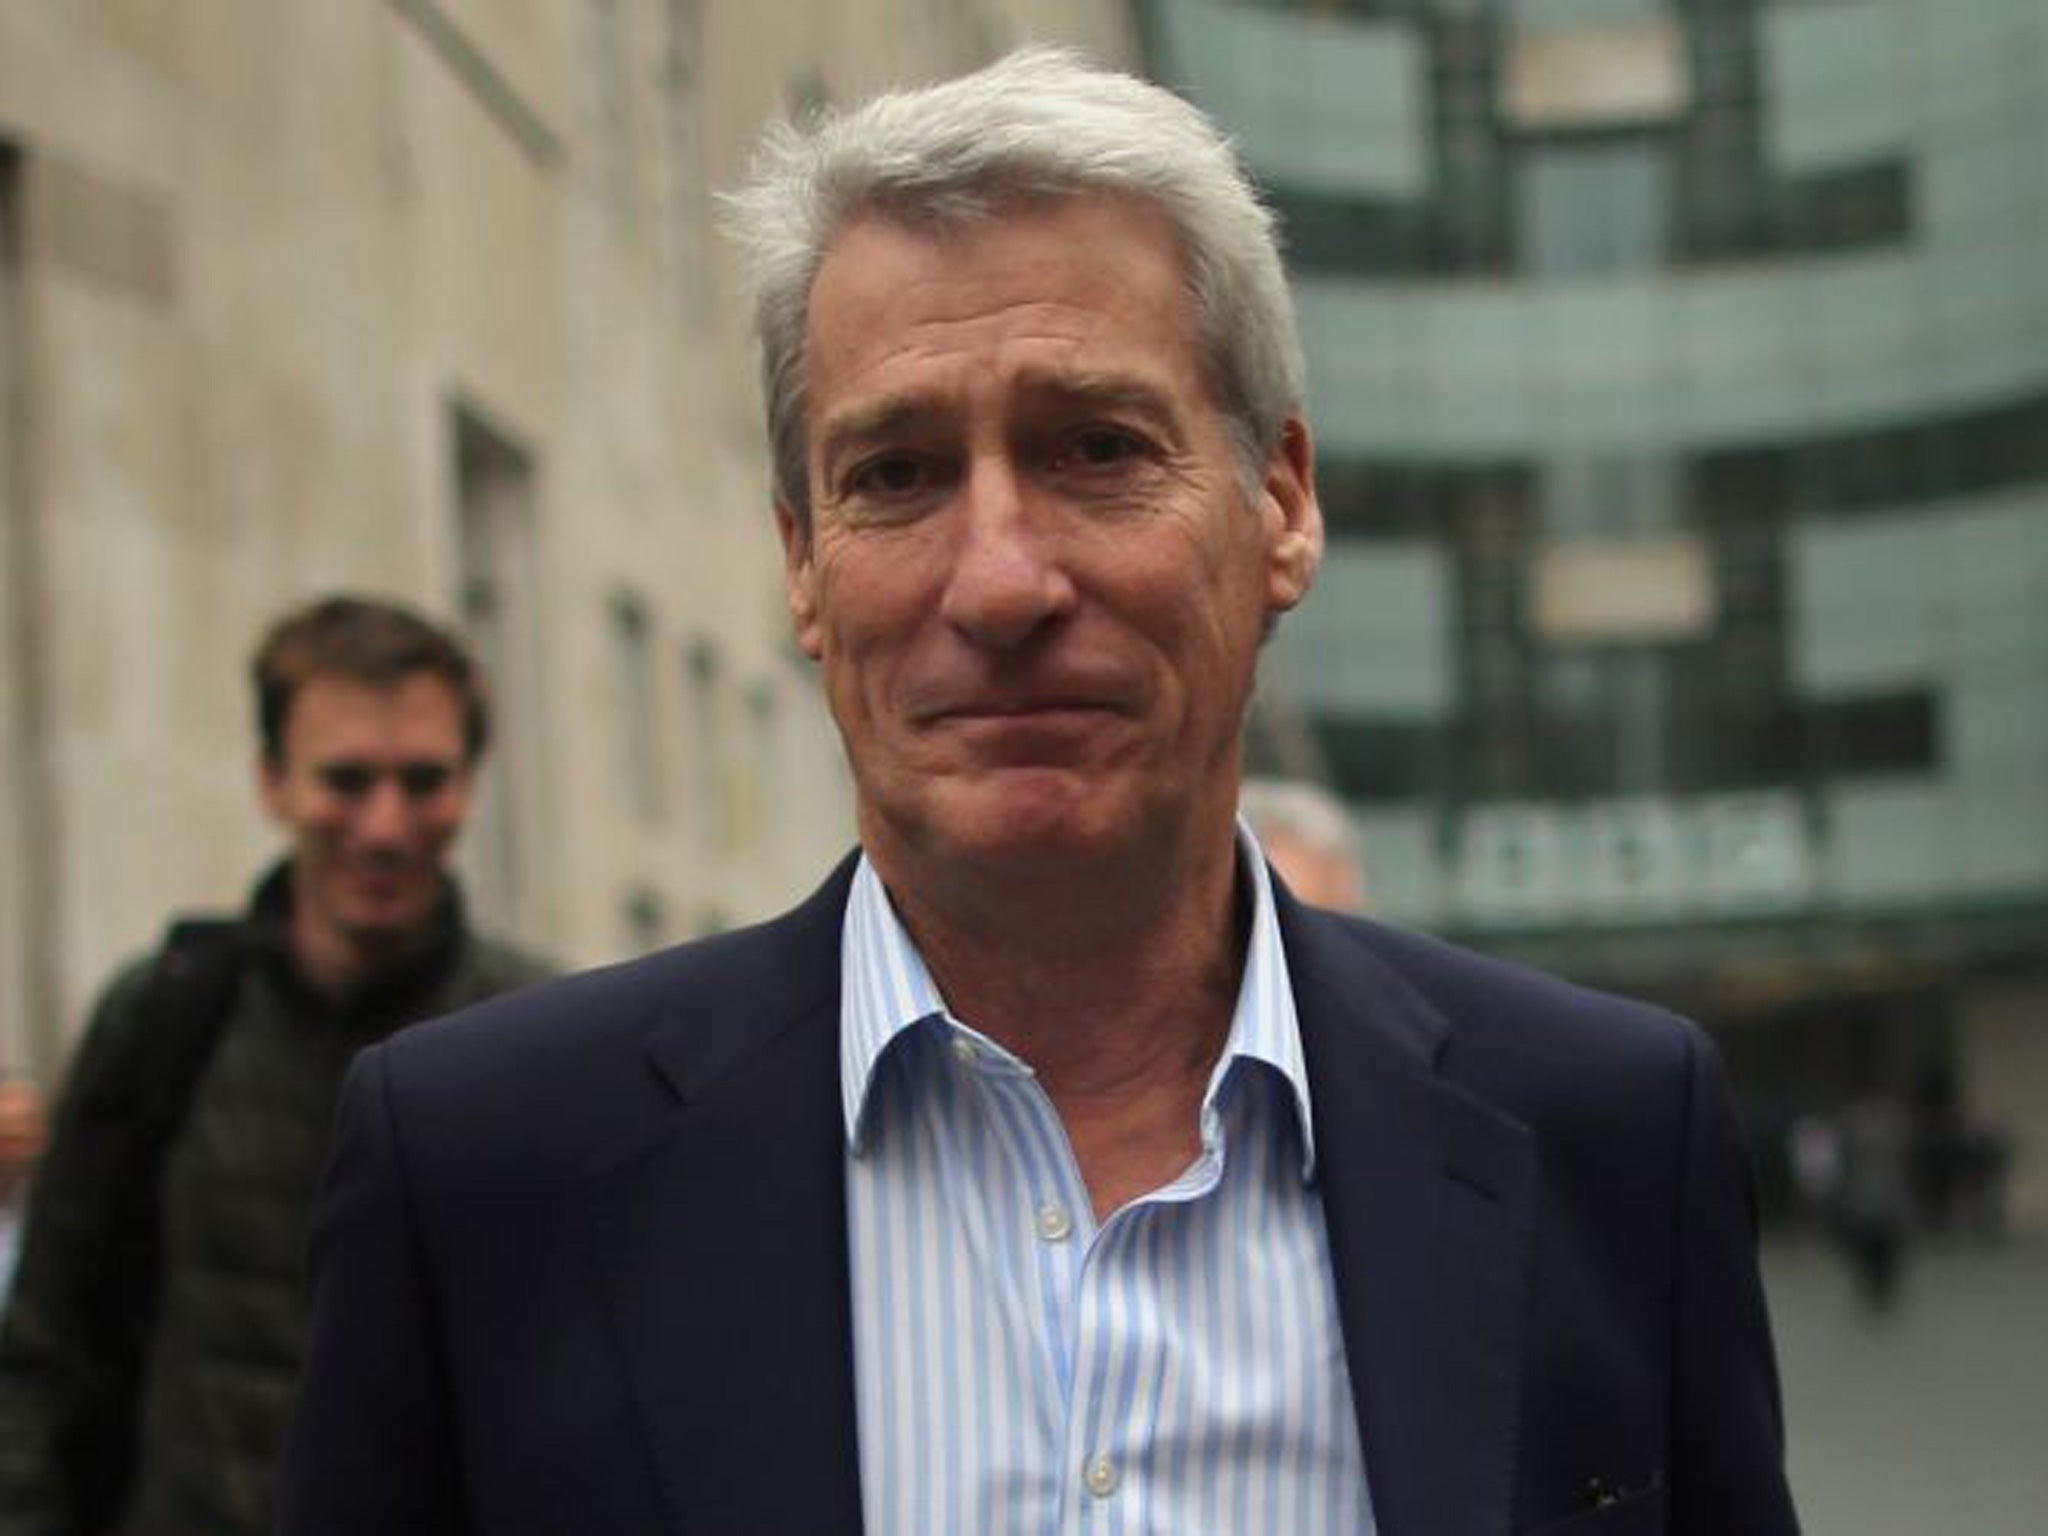 Paxman has angered Scots with his latest remarks